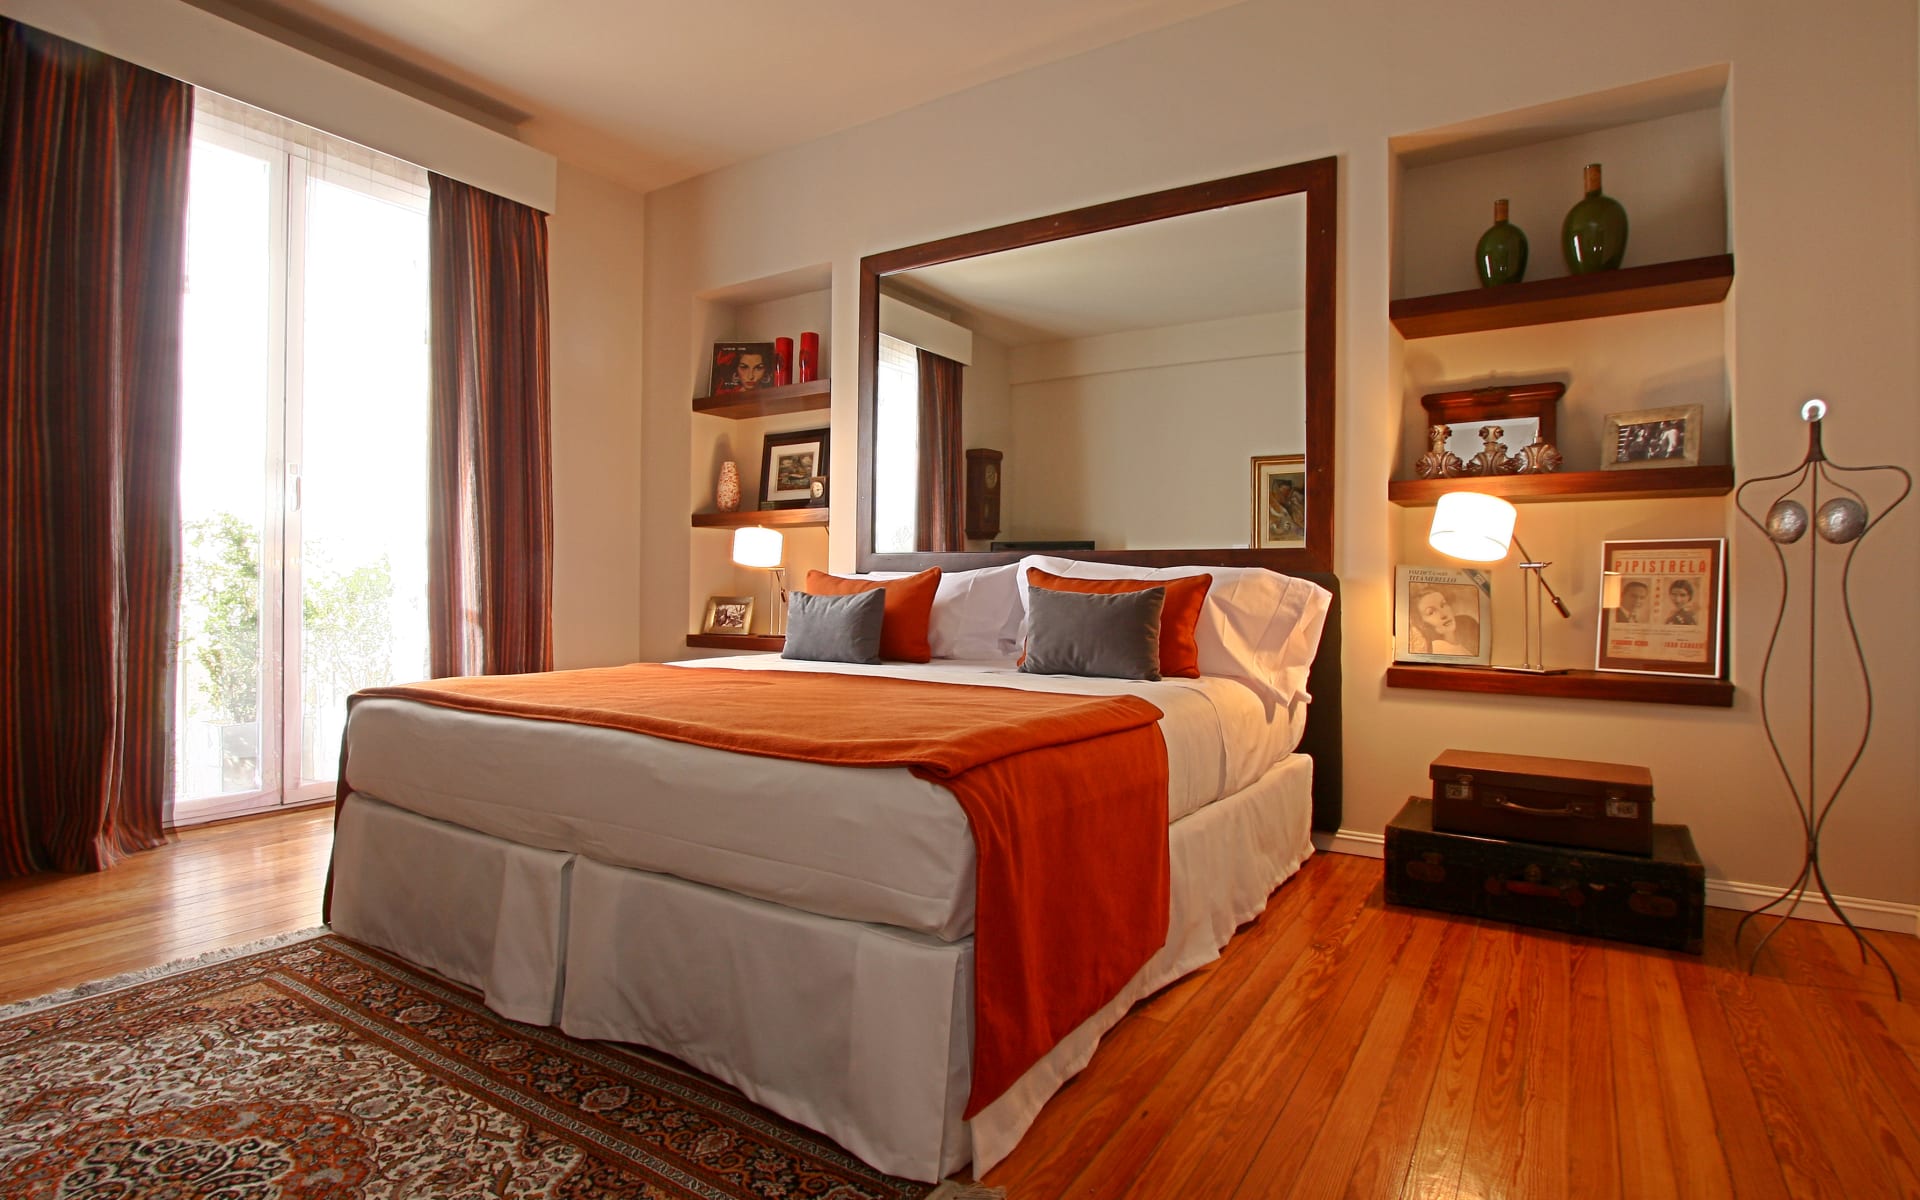 The bedrooms at Legado Mitico are airy, with wooden floors, lots of natural sunlight, a doubled bed with an orange blanket and wooden shelves.